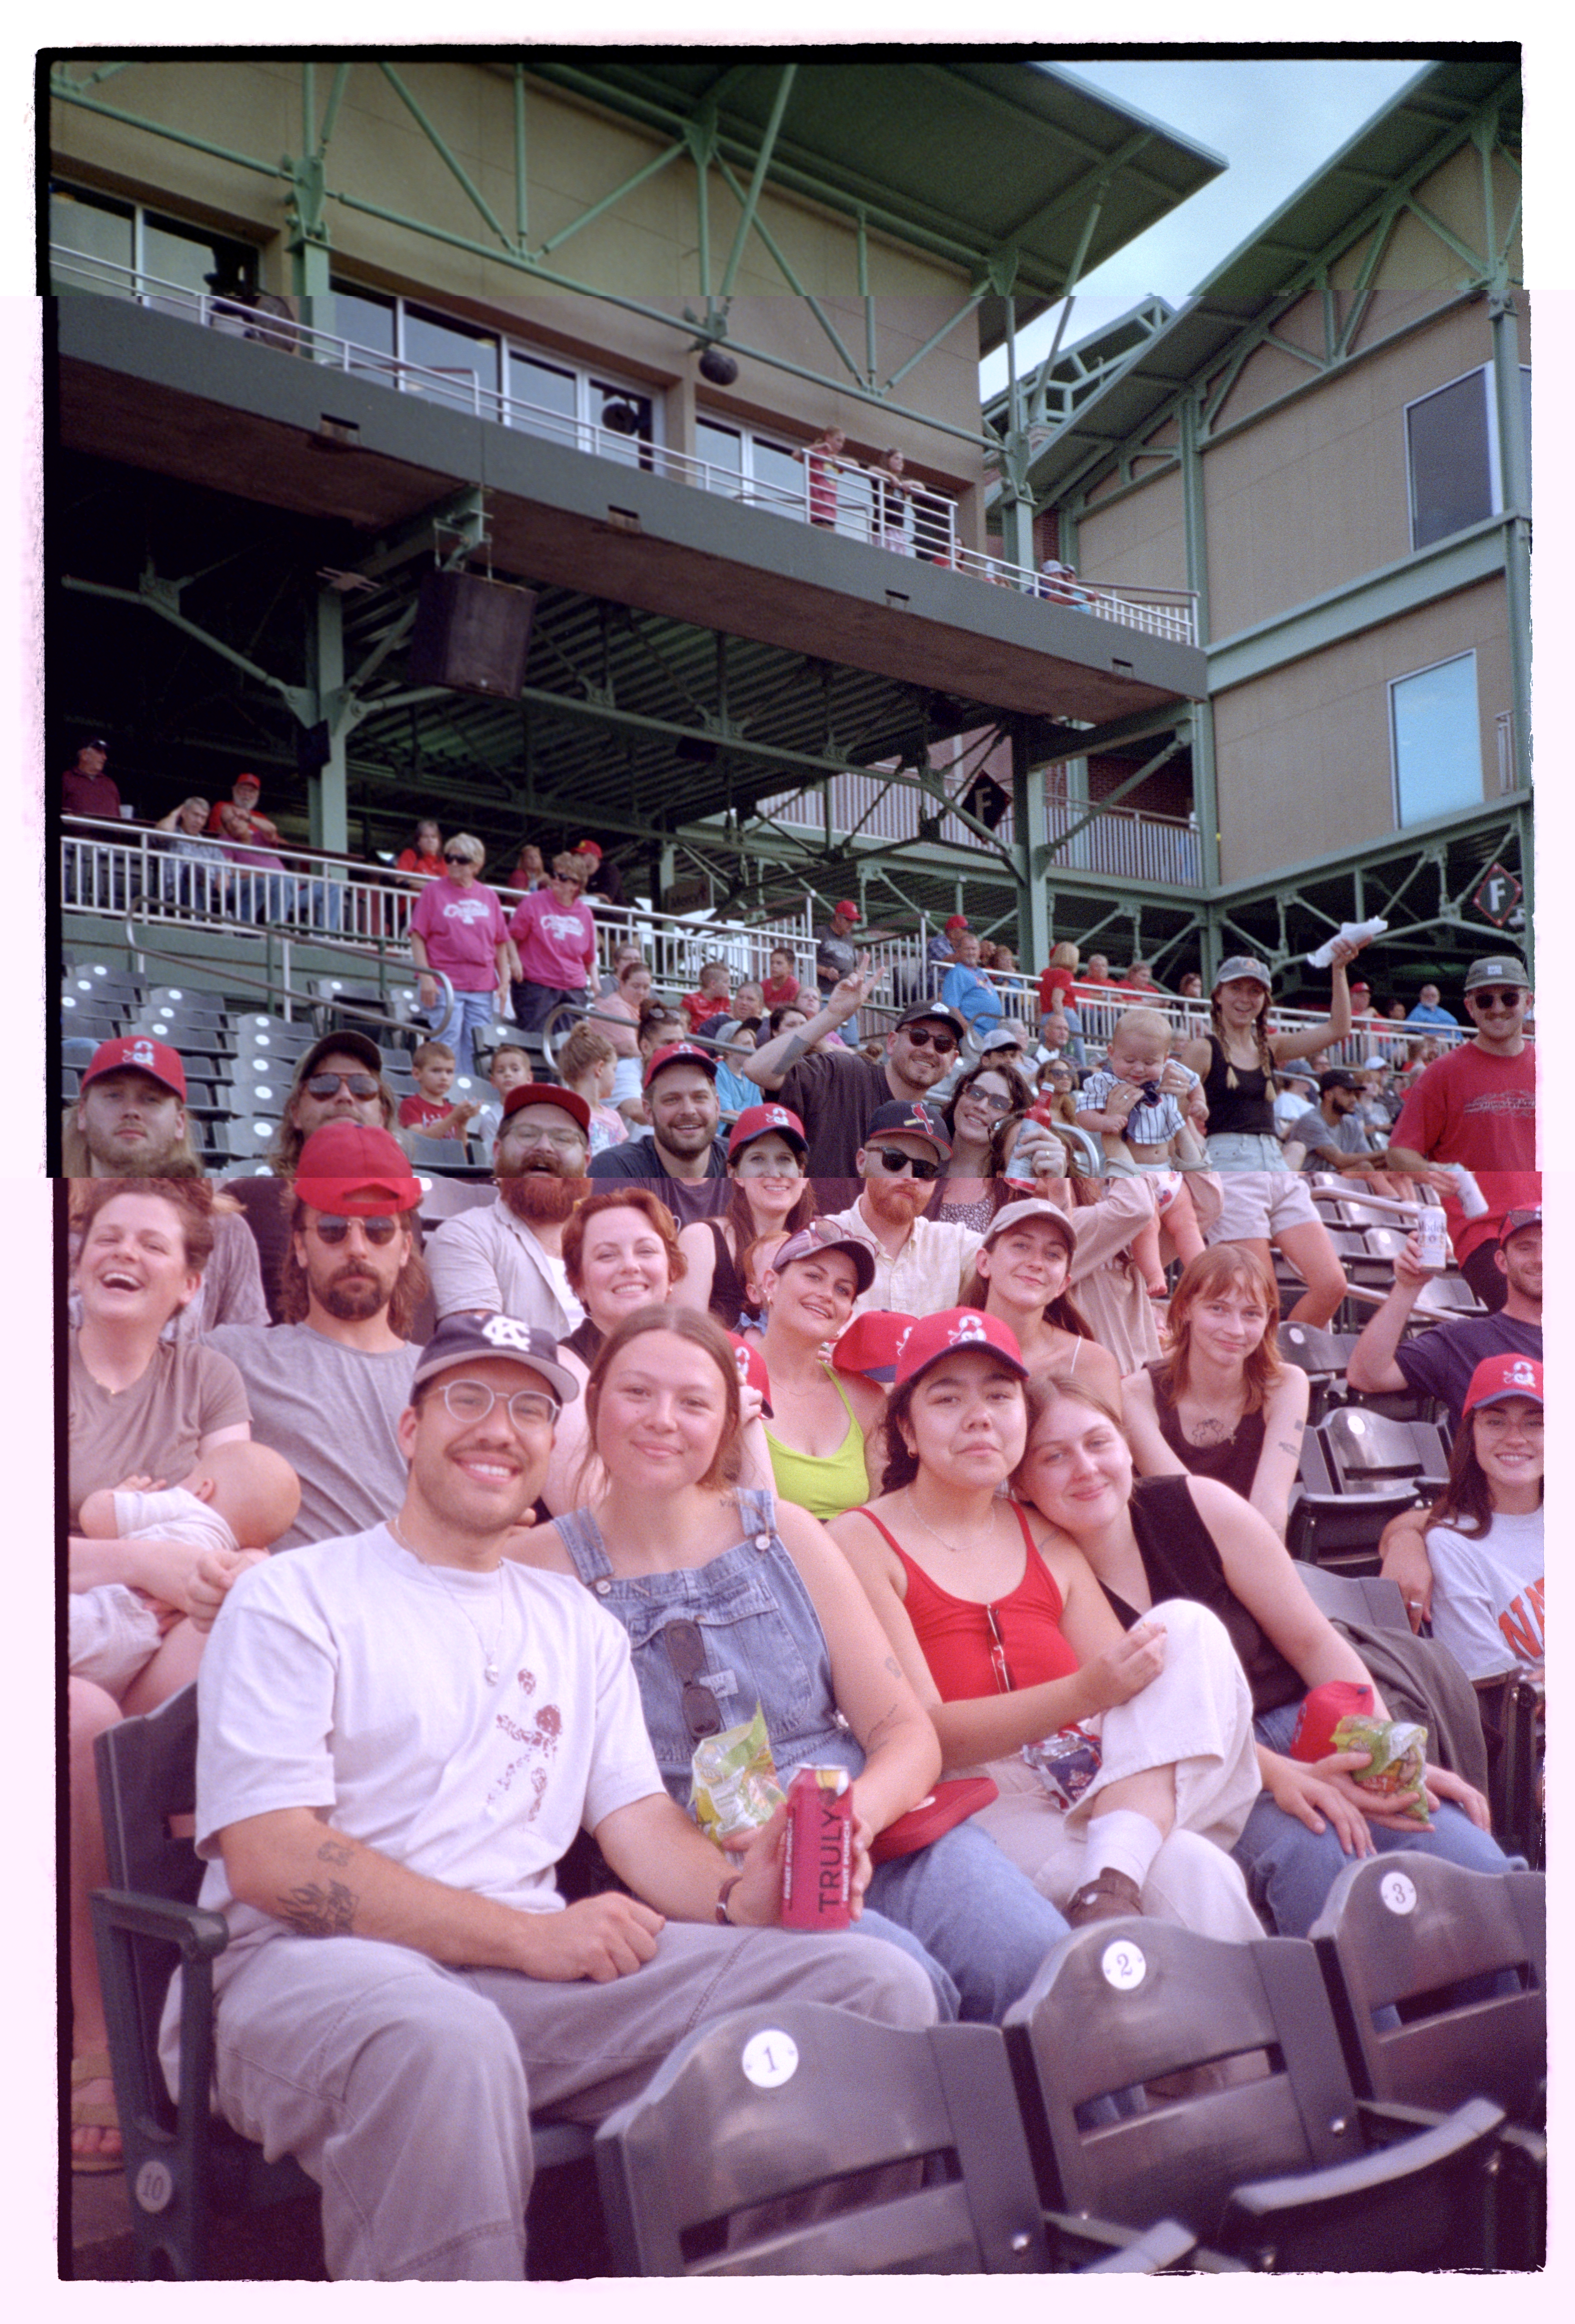 Fans at a baseball game pose for a group photo